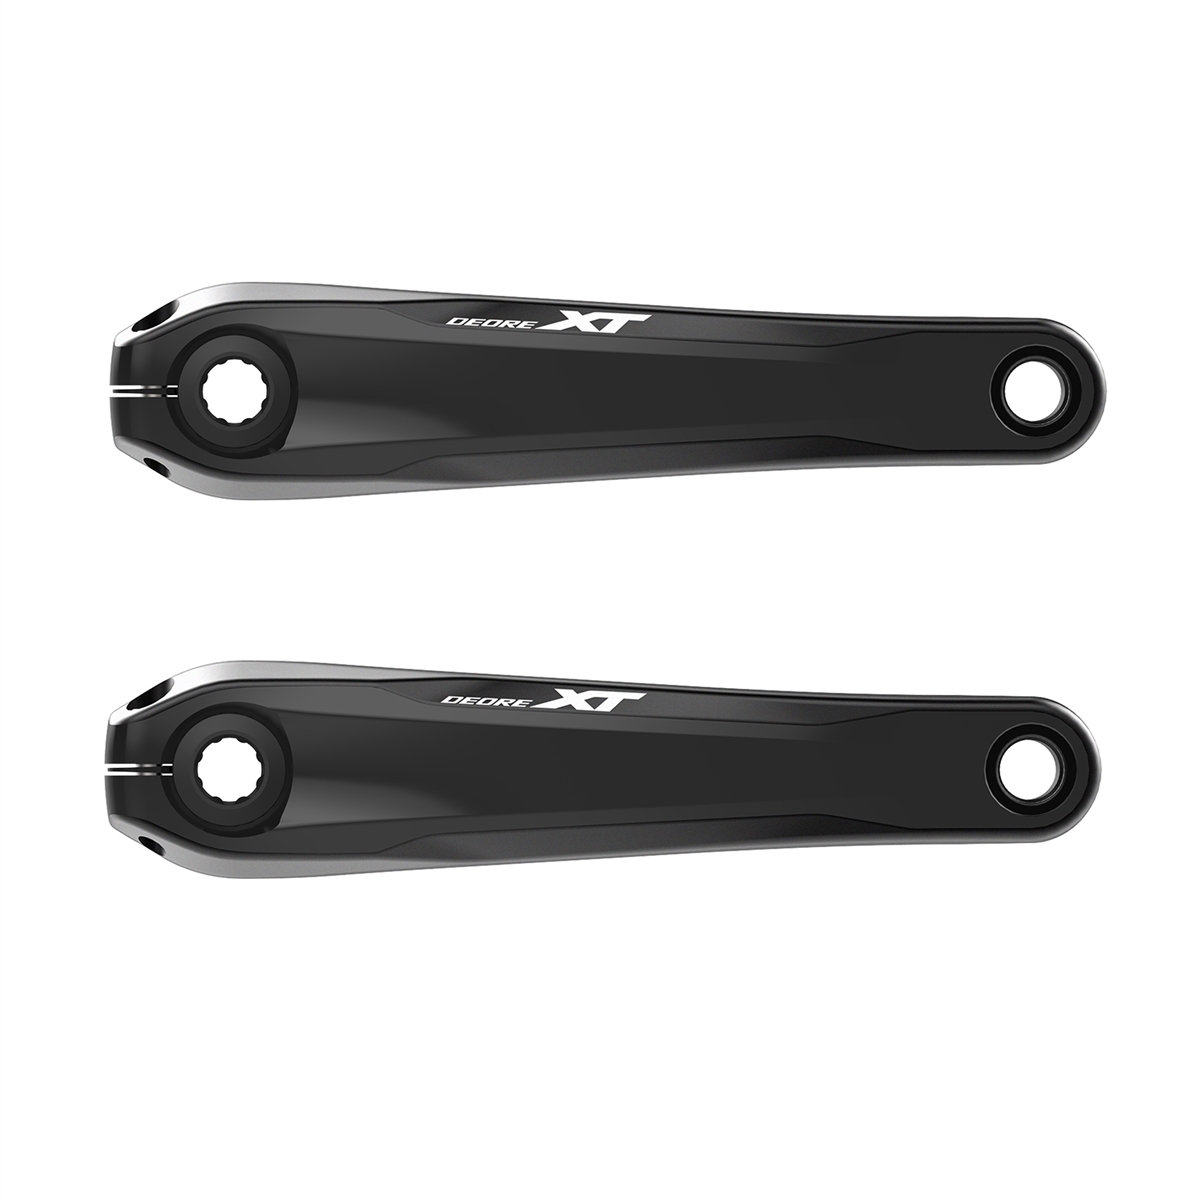 Cranks arms for EP8 engine Hollowtech FC-M8150 160mm